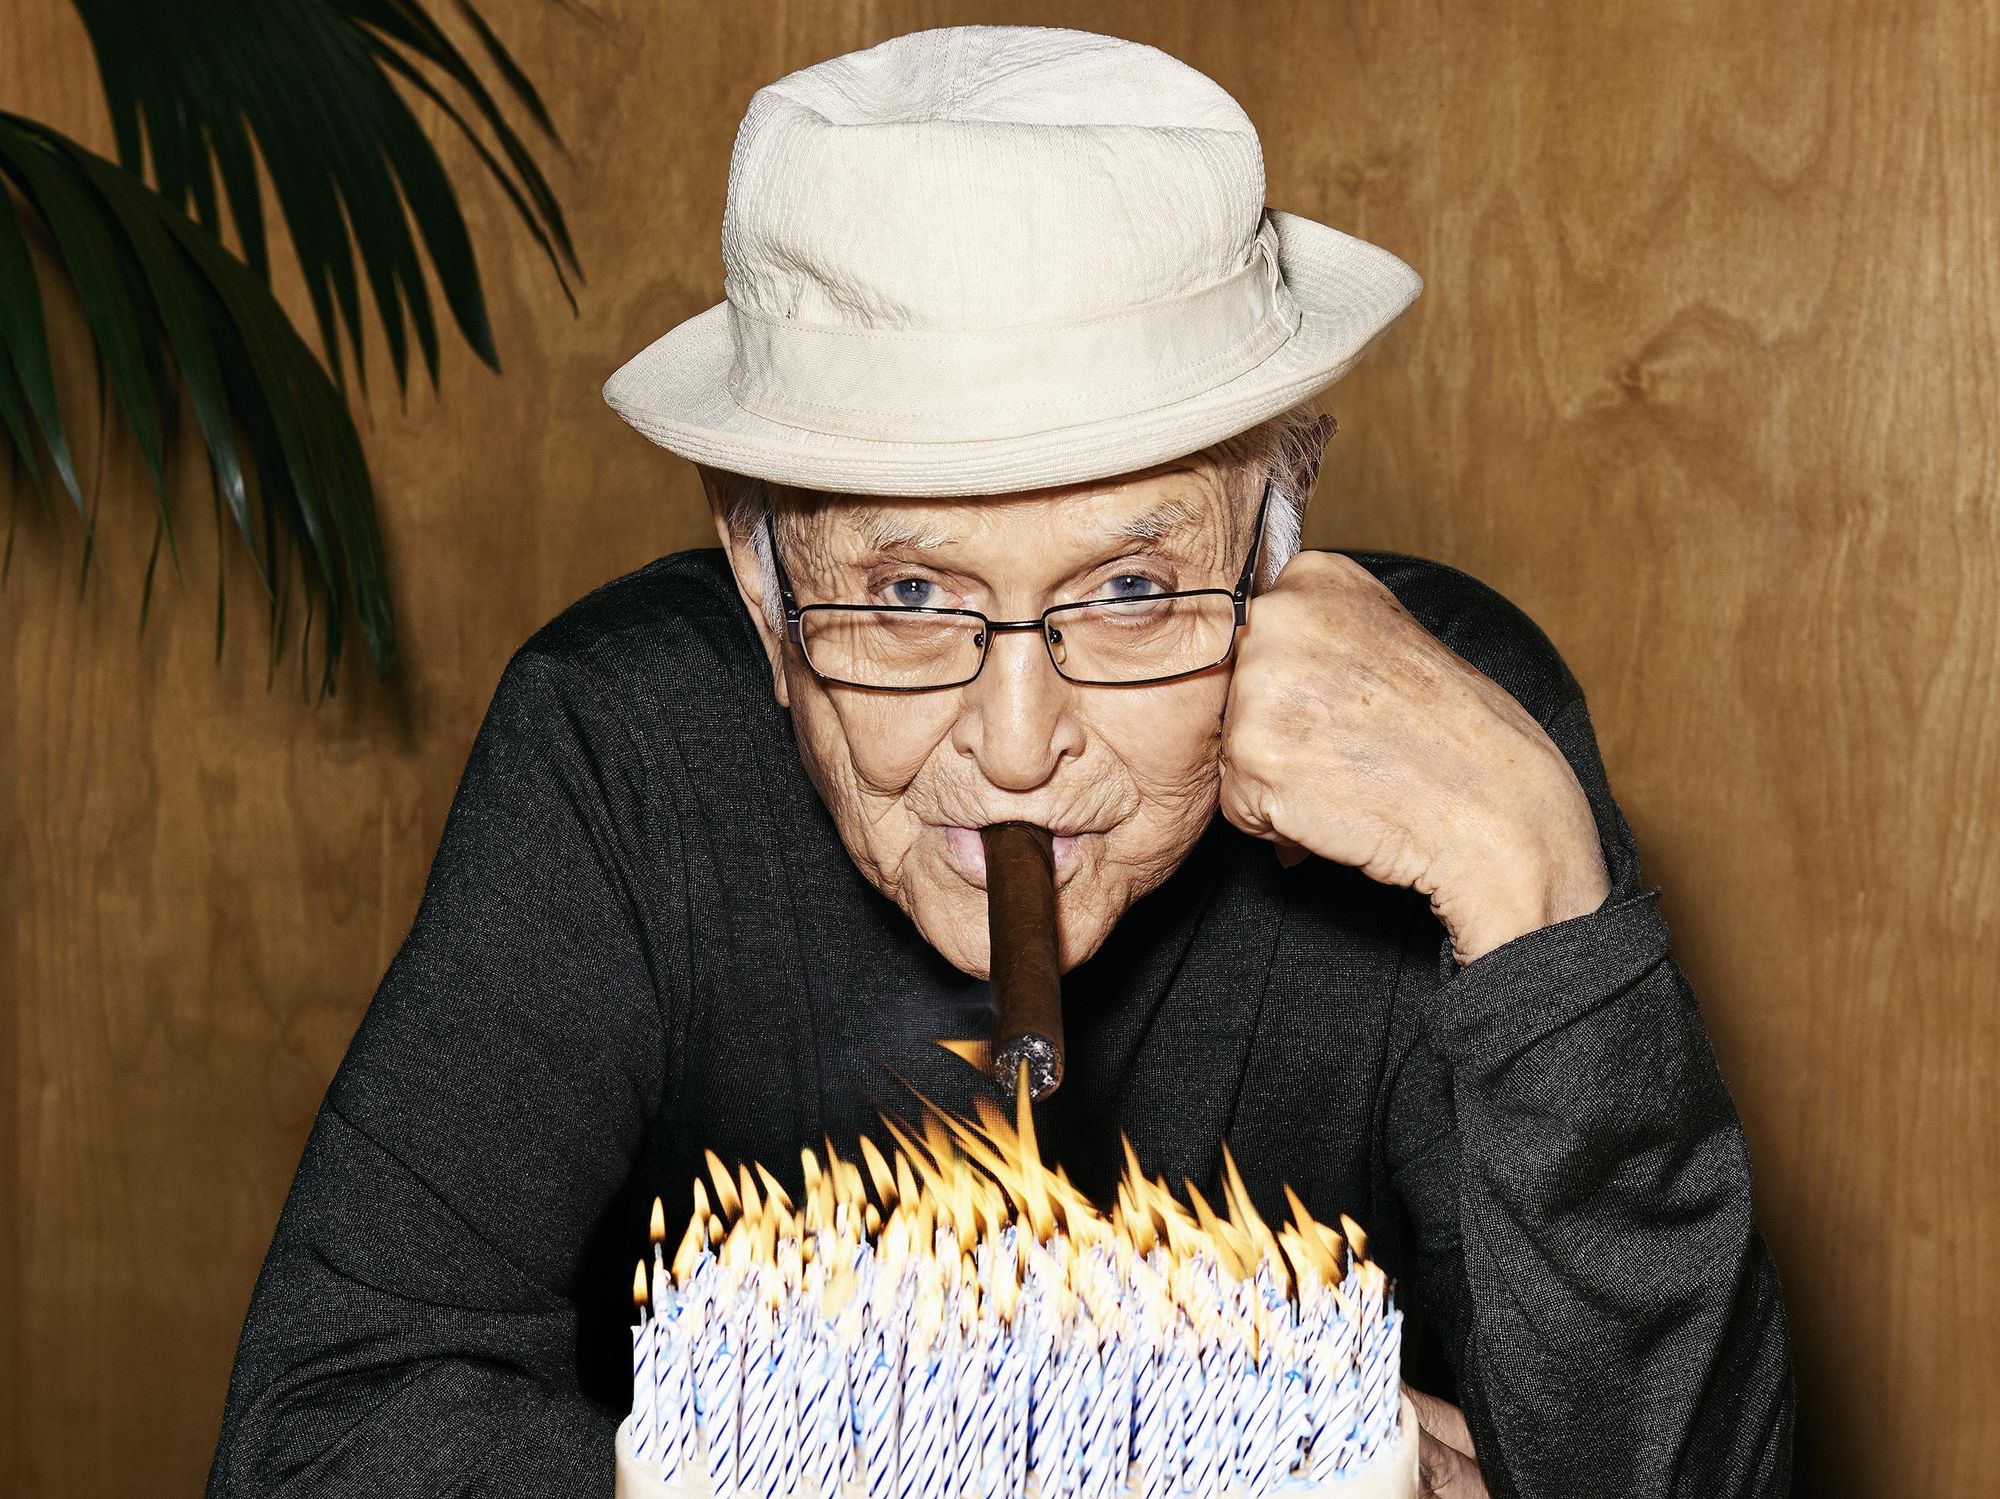 Prolific producer Norman Lear sits with a cigar poised over a birthday cake with 100 candles blazing away.